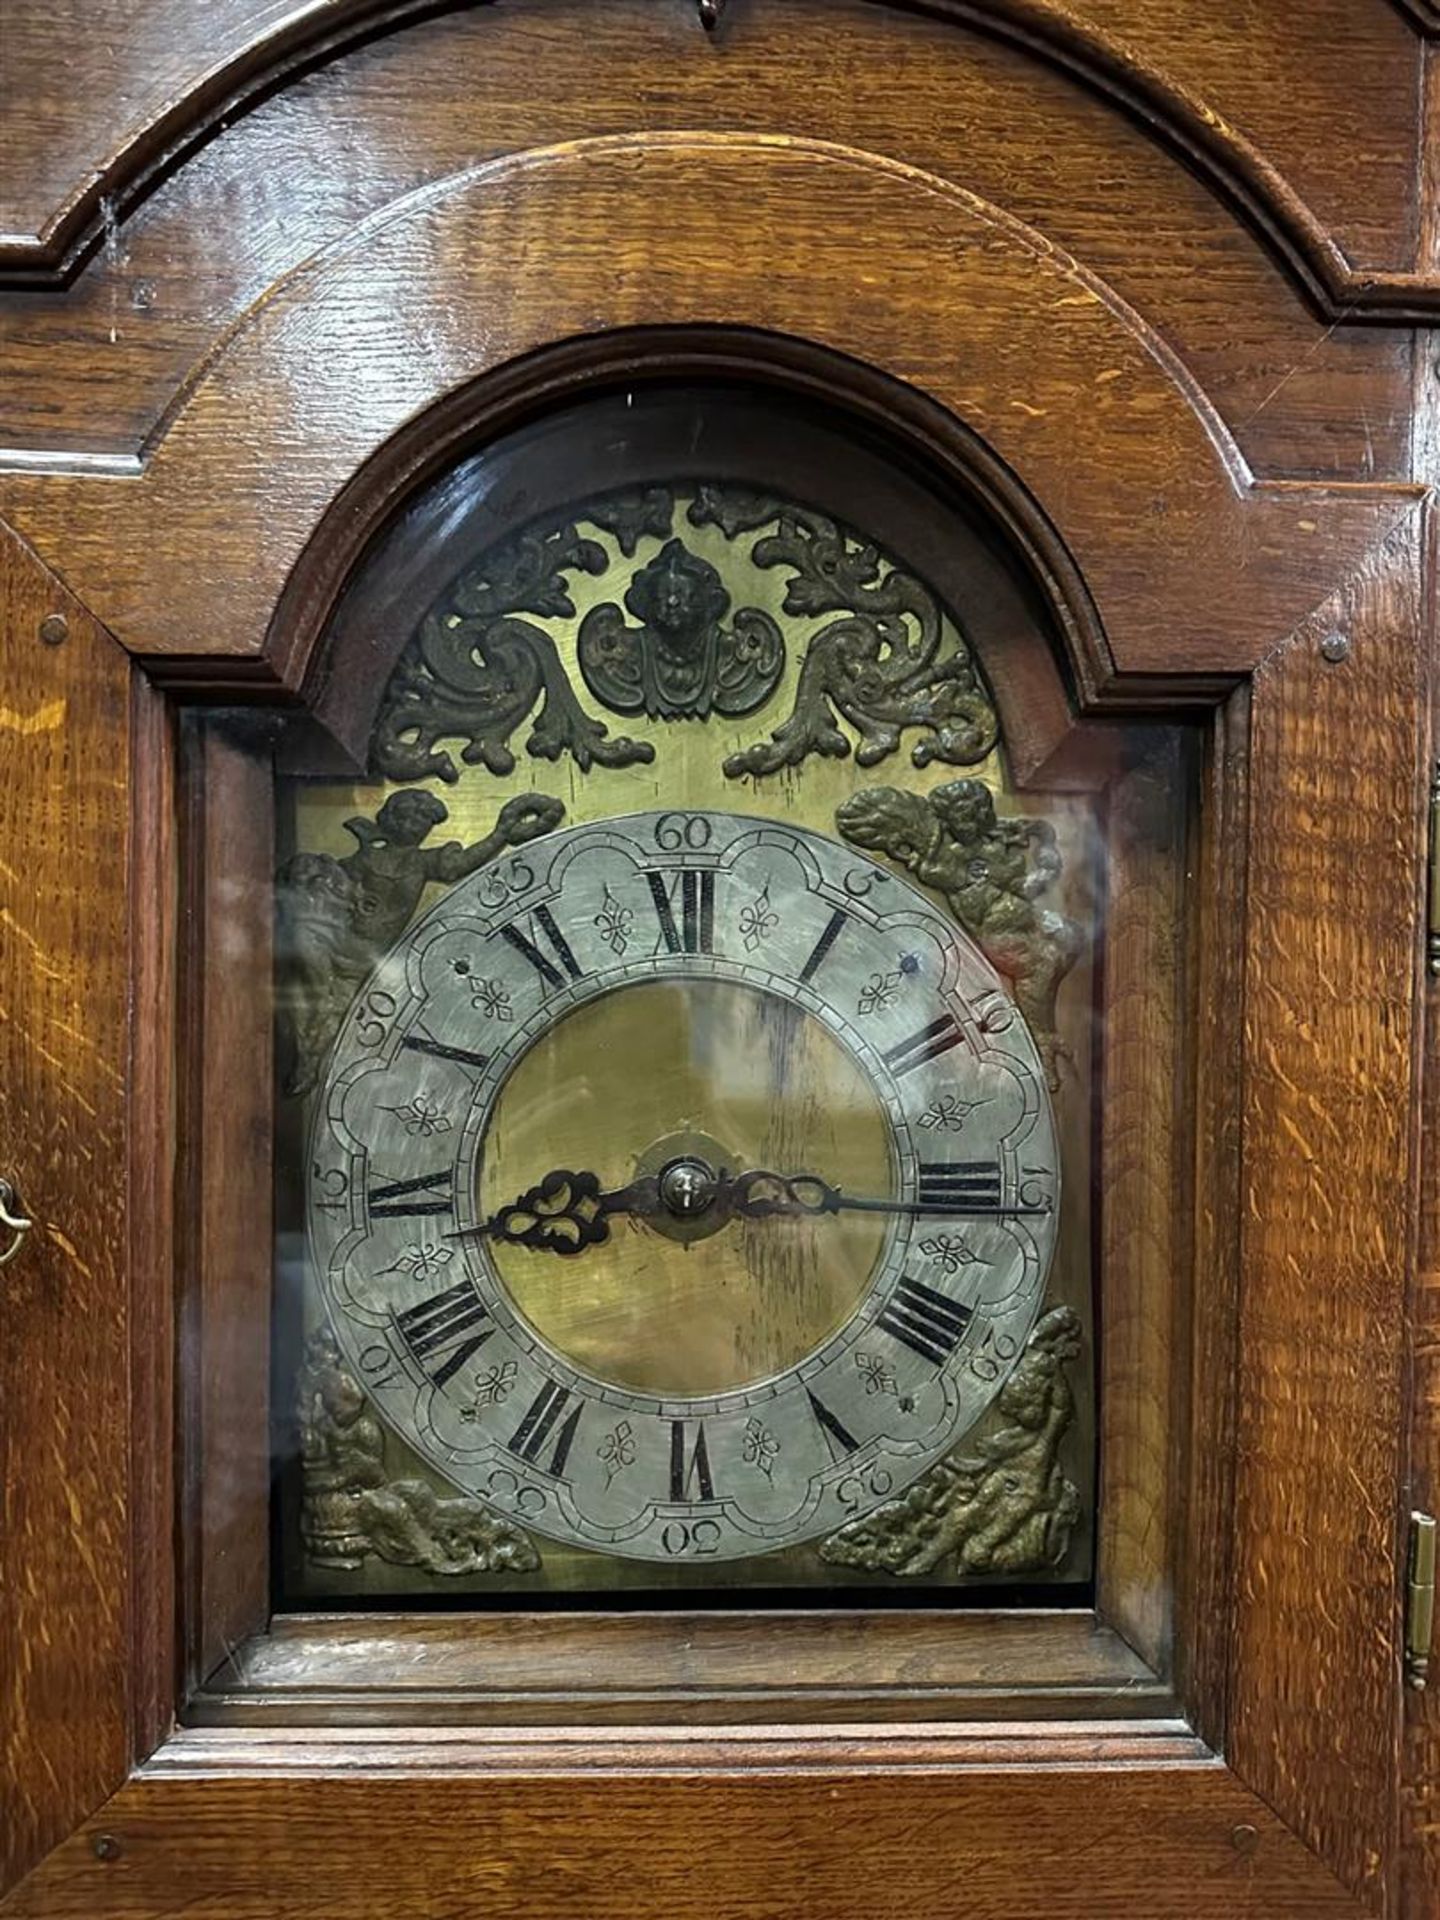 A grandfather clock with atlas and fama images. Simple timepiece.
H.: 278 cm. - Image 2 of 2